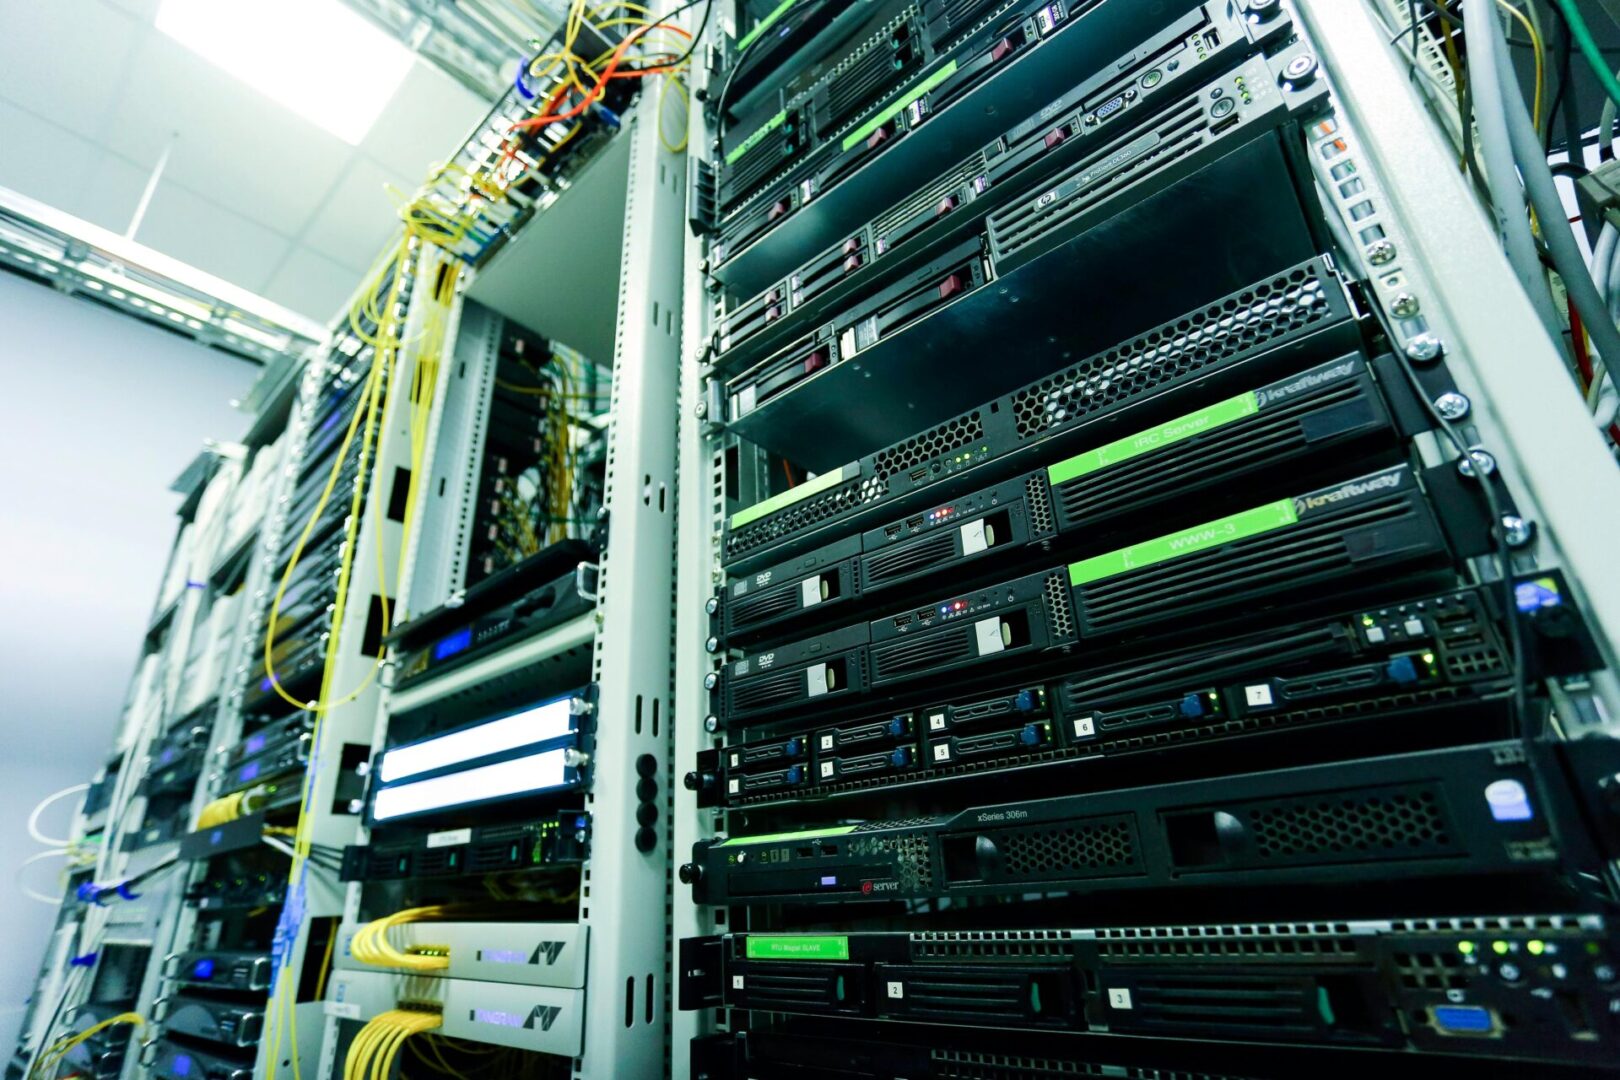 A rack of servers in a room with wires.